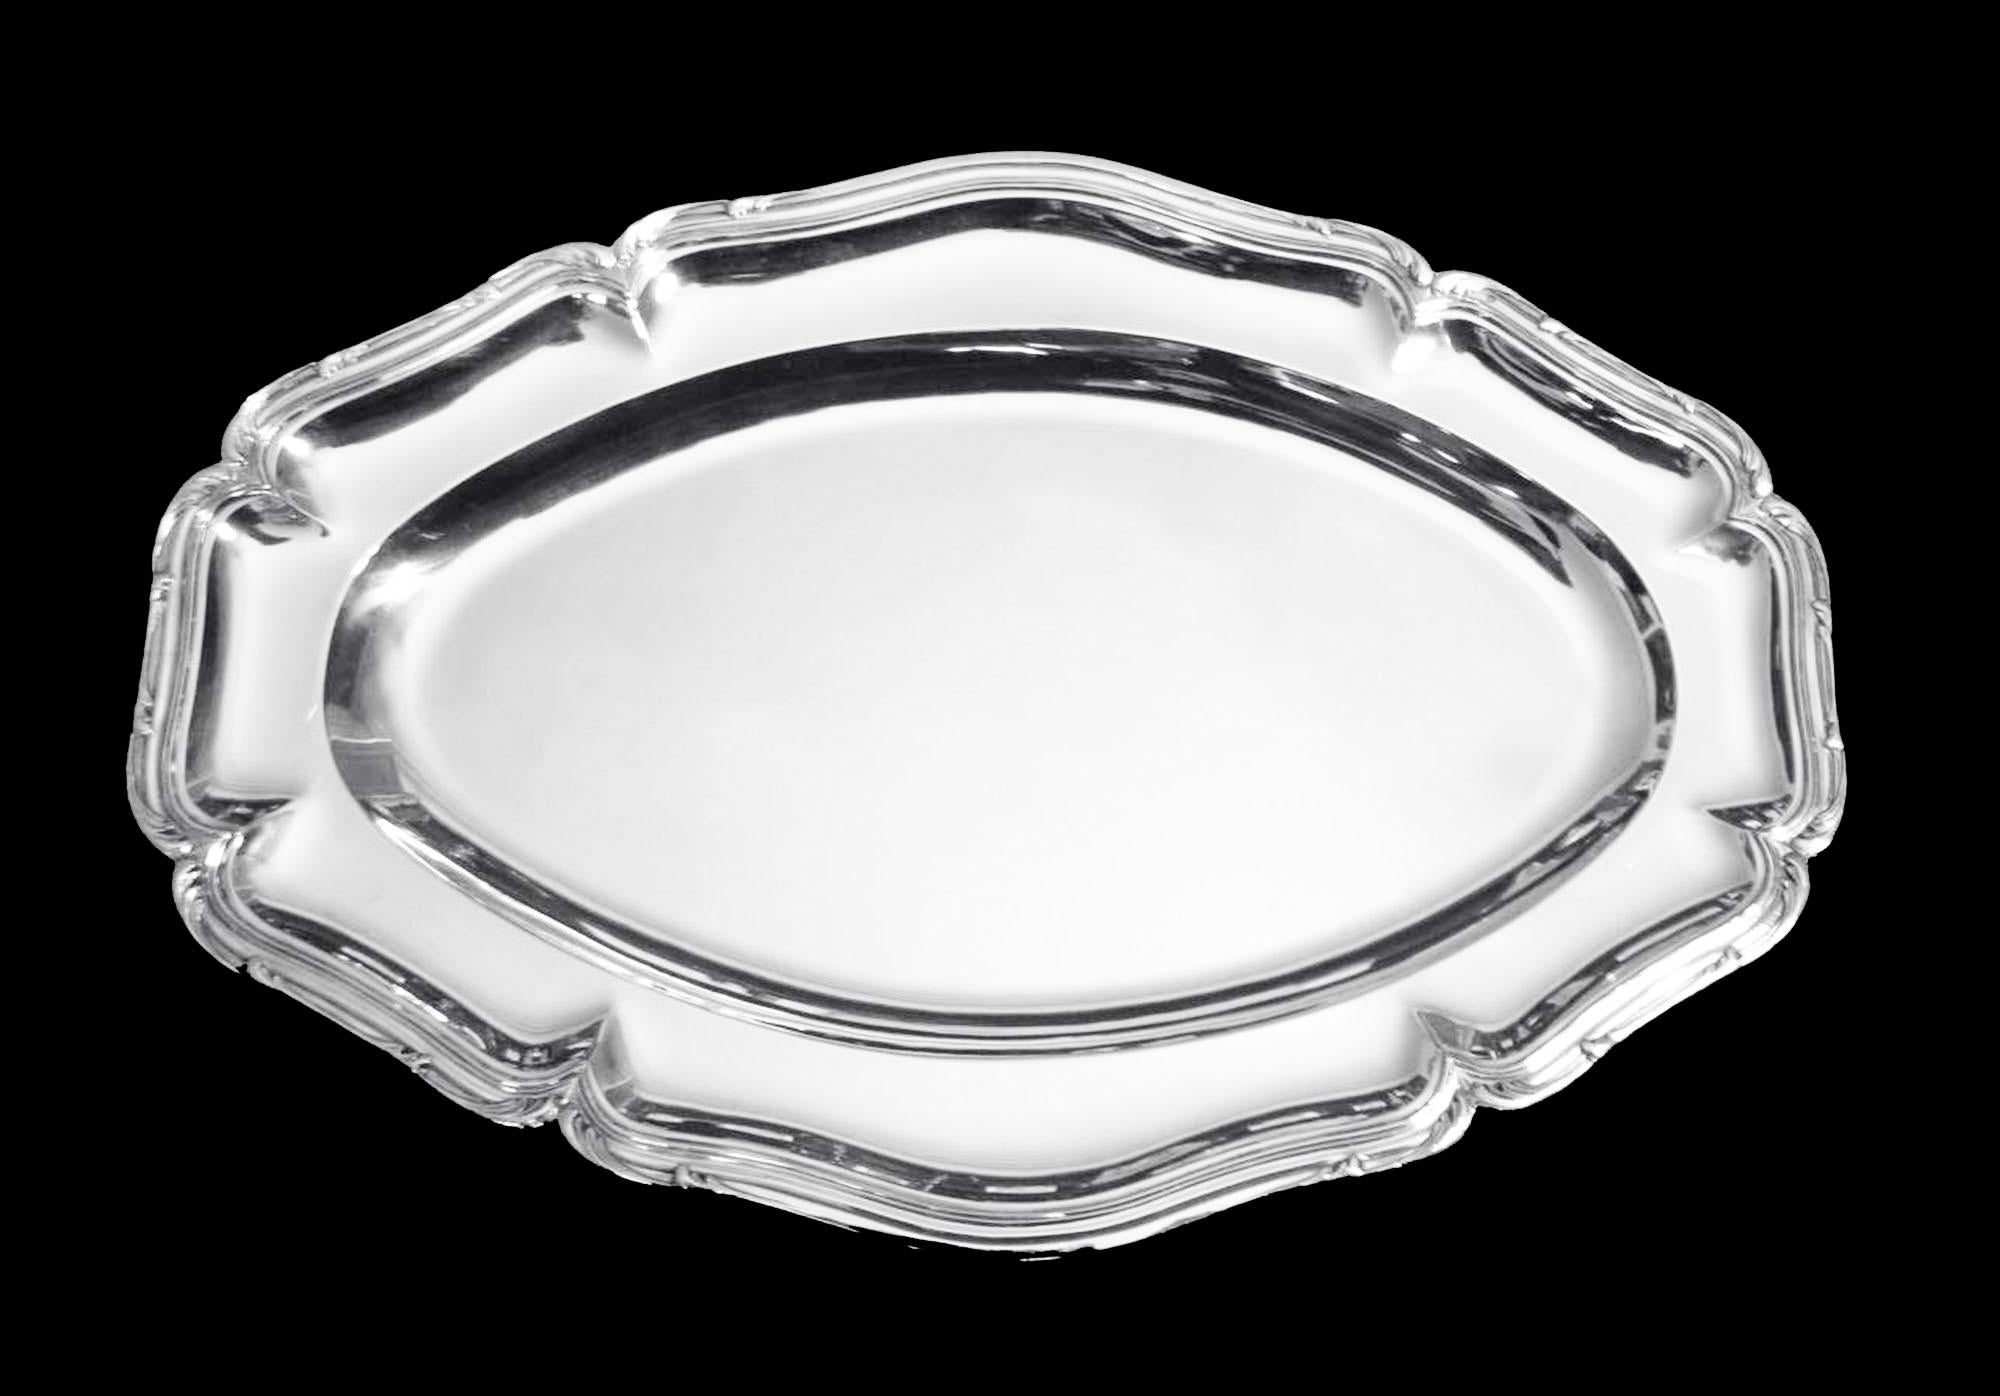 Late 19th Century Alphonse Debain - 10pc Antique French 950 Sterling Silver Serving Platter Set.